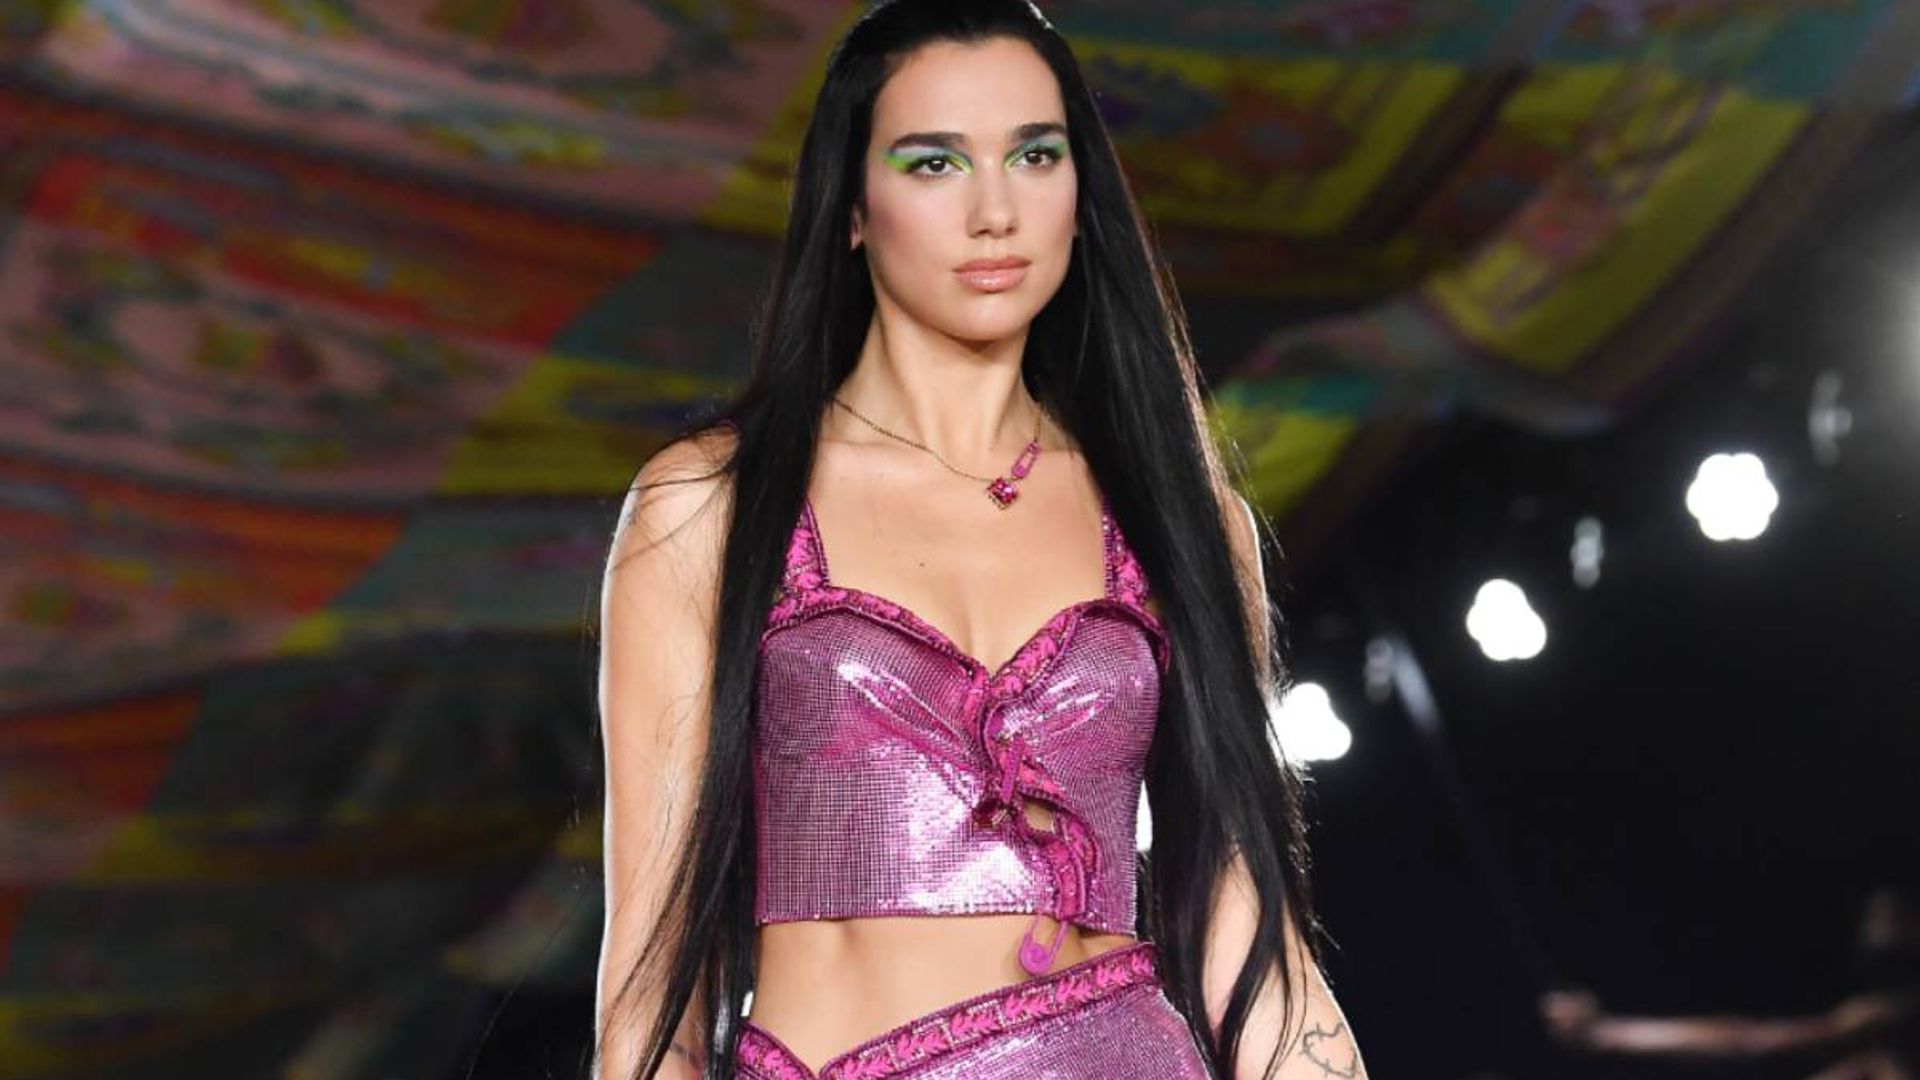 Dua Lipa gives Angelina Jolie vibes with a daring dress and glam hair transformation